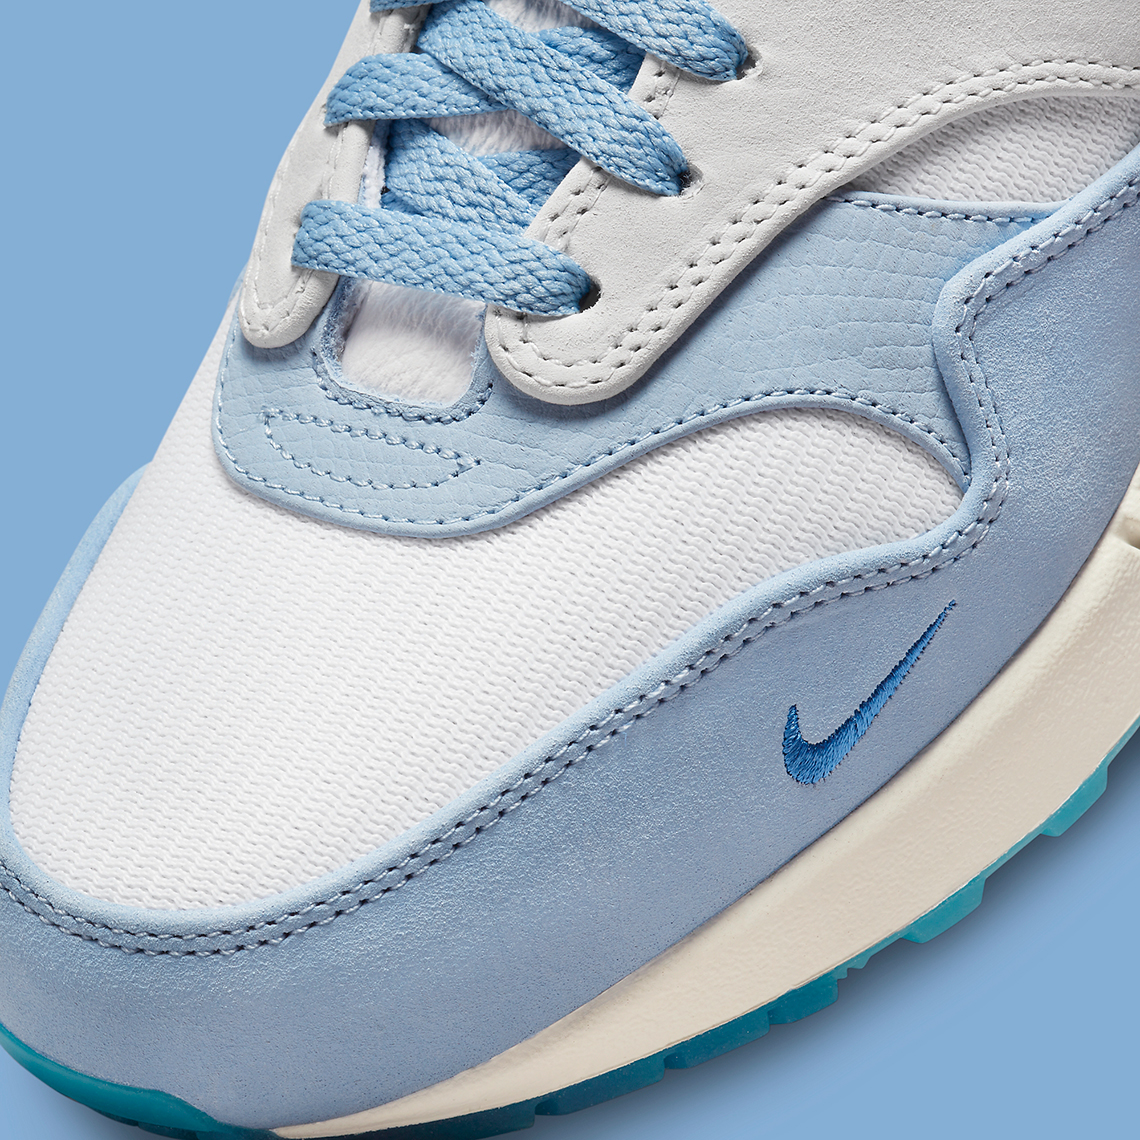 nike air max 1 blueprint dr0448 100 release date 5